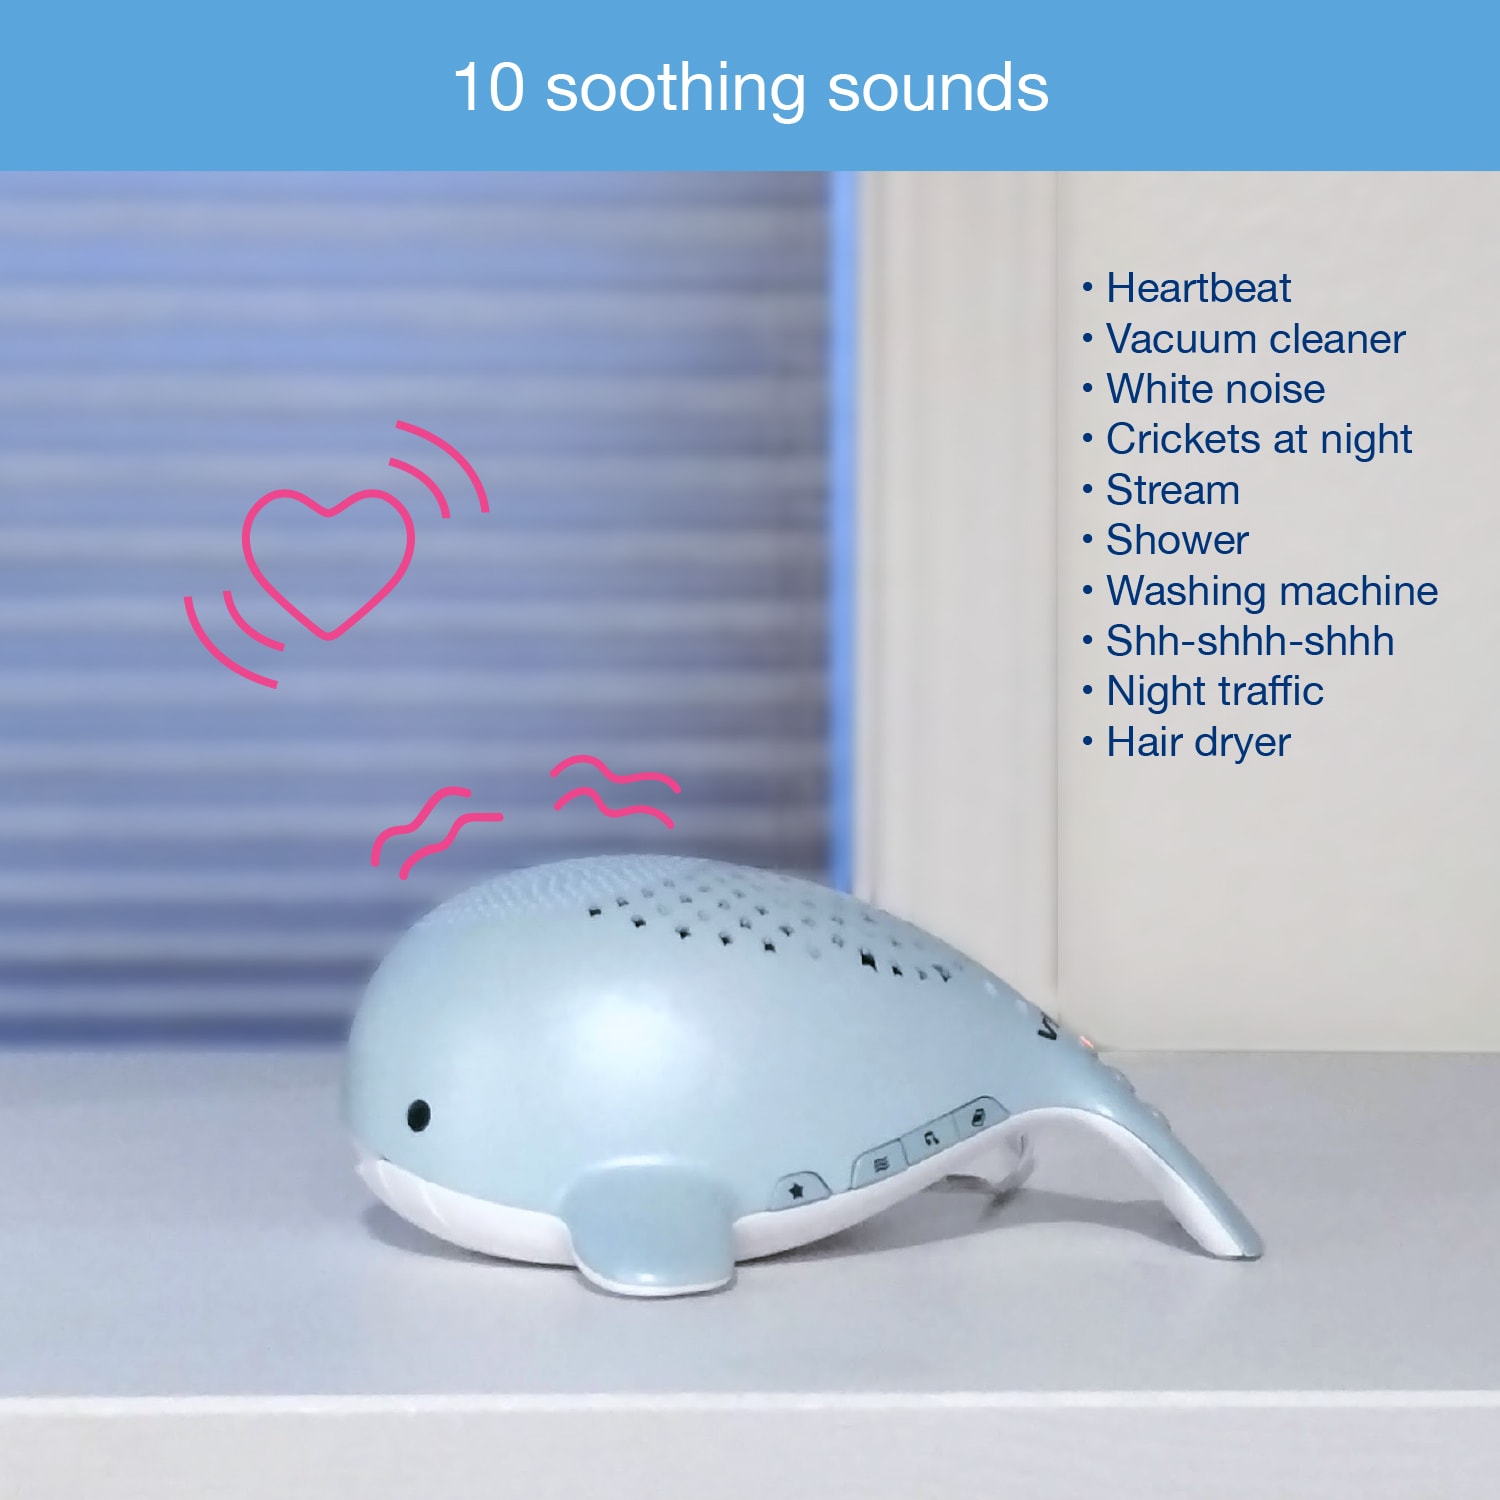 Wyatt the Whale® Storytelling Soother - view 9